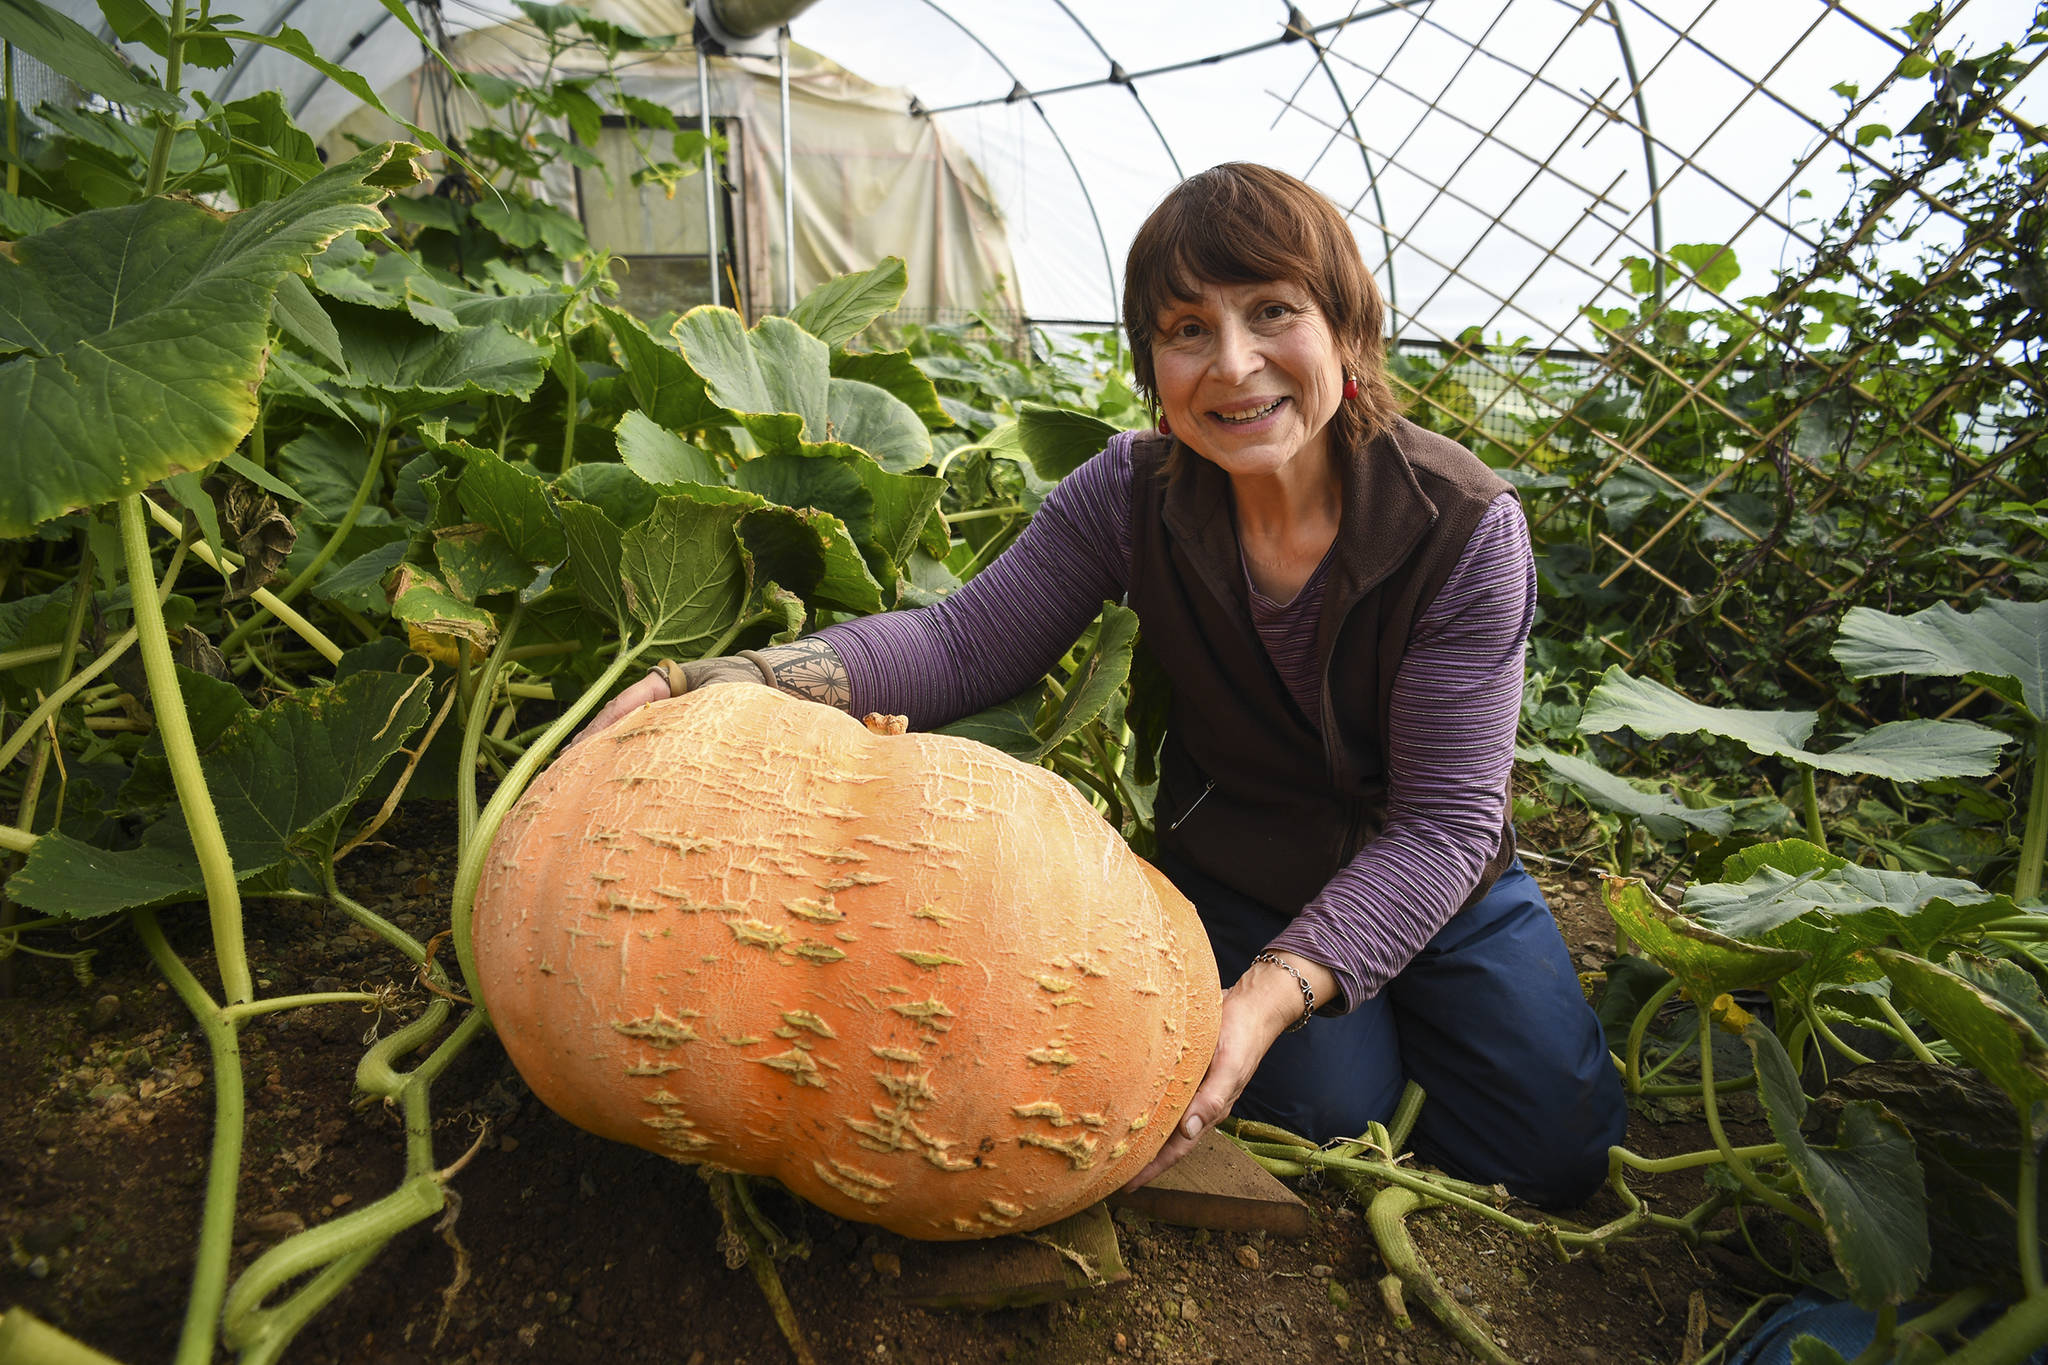 Brenda Krauss poses with her 84-pound “Dill’s Atlantic Giant” pumpkin in her Juneau greenhouse on Wednesday, Sept. 11, 2019. Krauss started with four plants, and the vines of three took over her greenhouse. After cutting the pumpkin off the vine on Wednesday, Krauss drove the pumpkin to Alaska Marine Lines to have it weighed on a certified scale. <ins>Watch the video below.</ins> (Michael Penn | Juneau Empire)